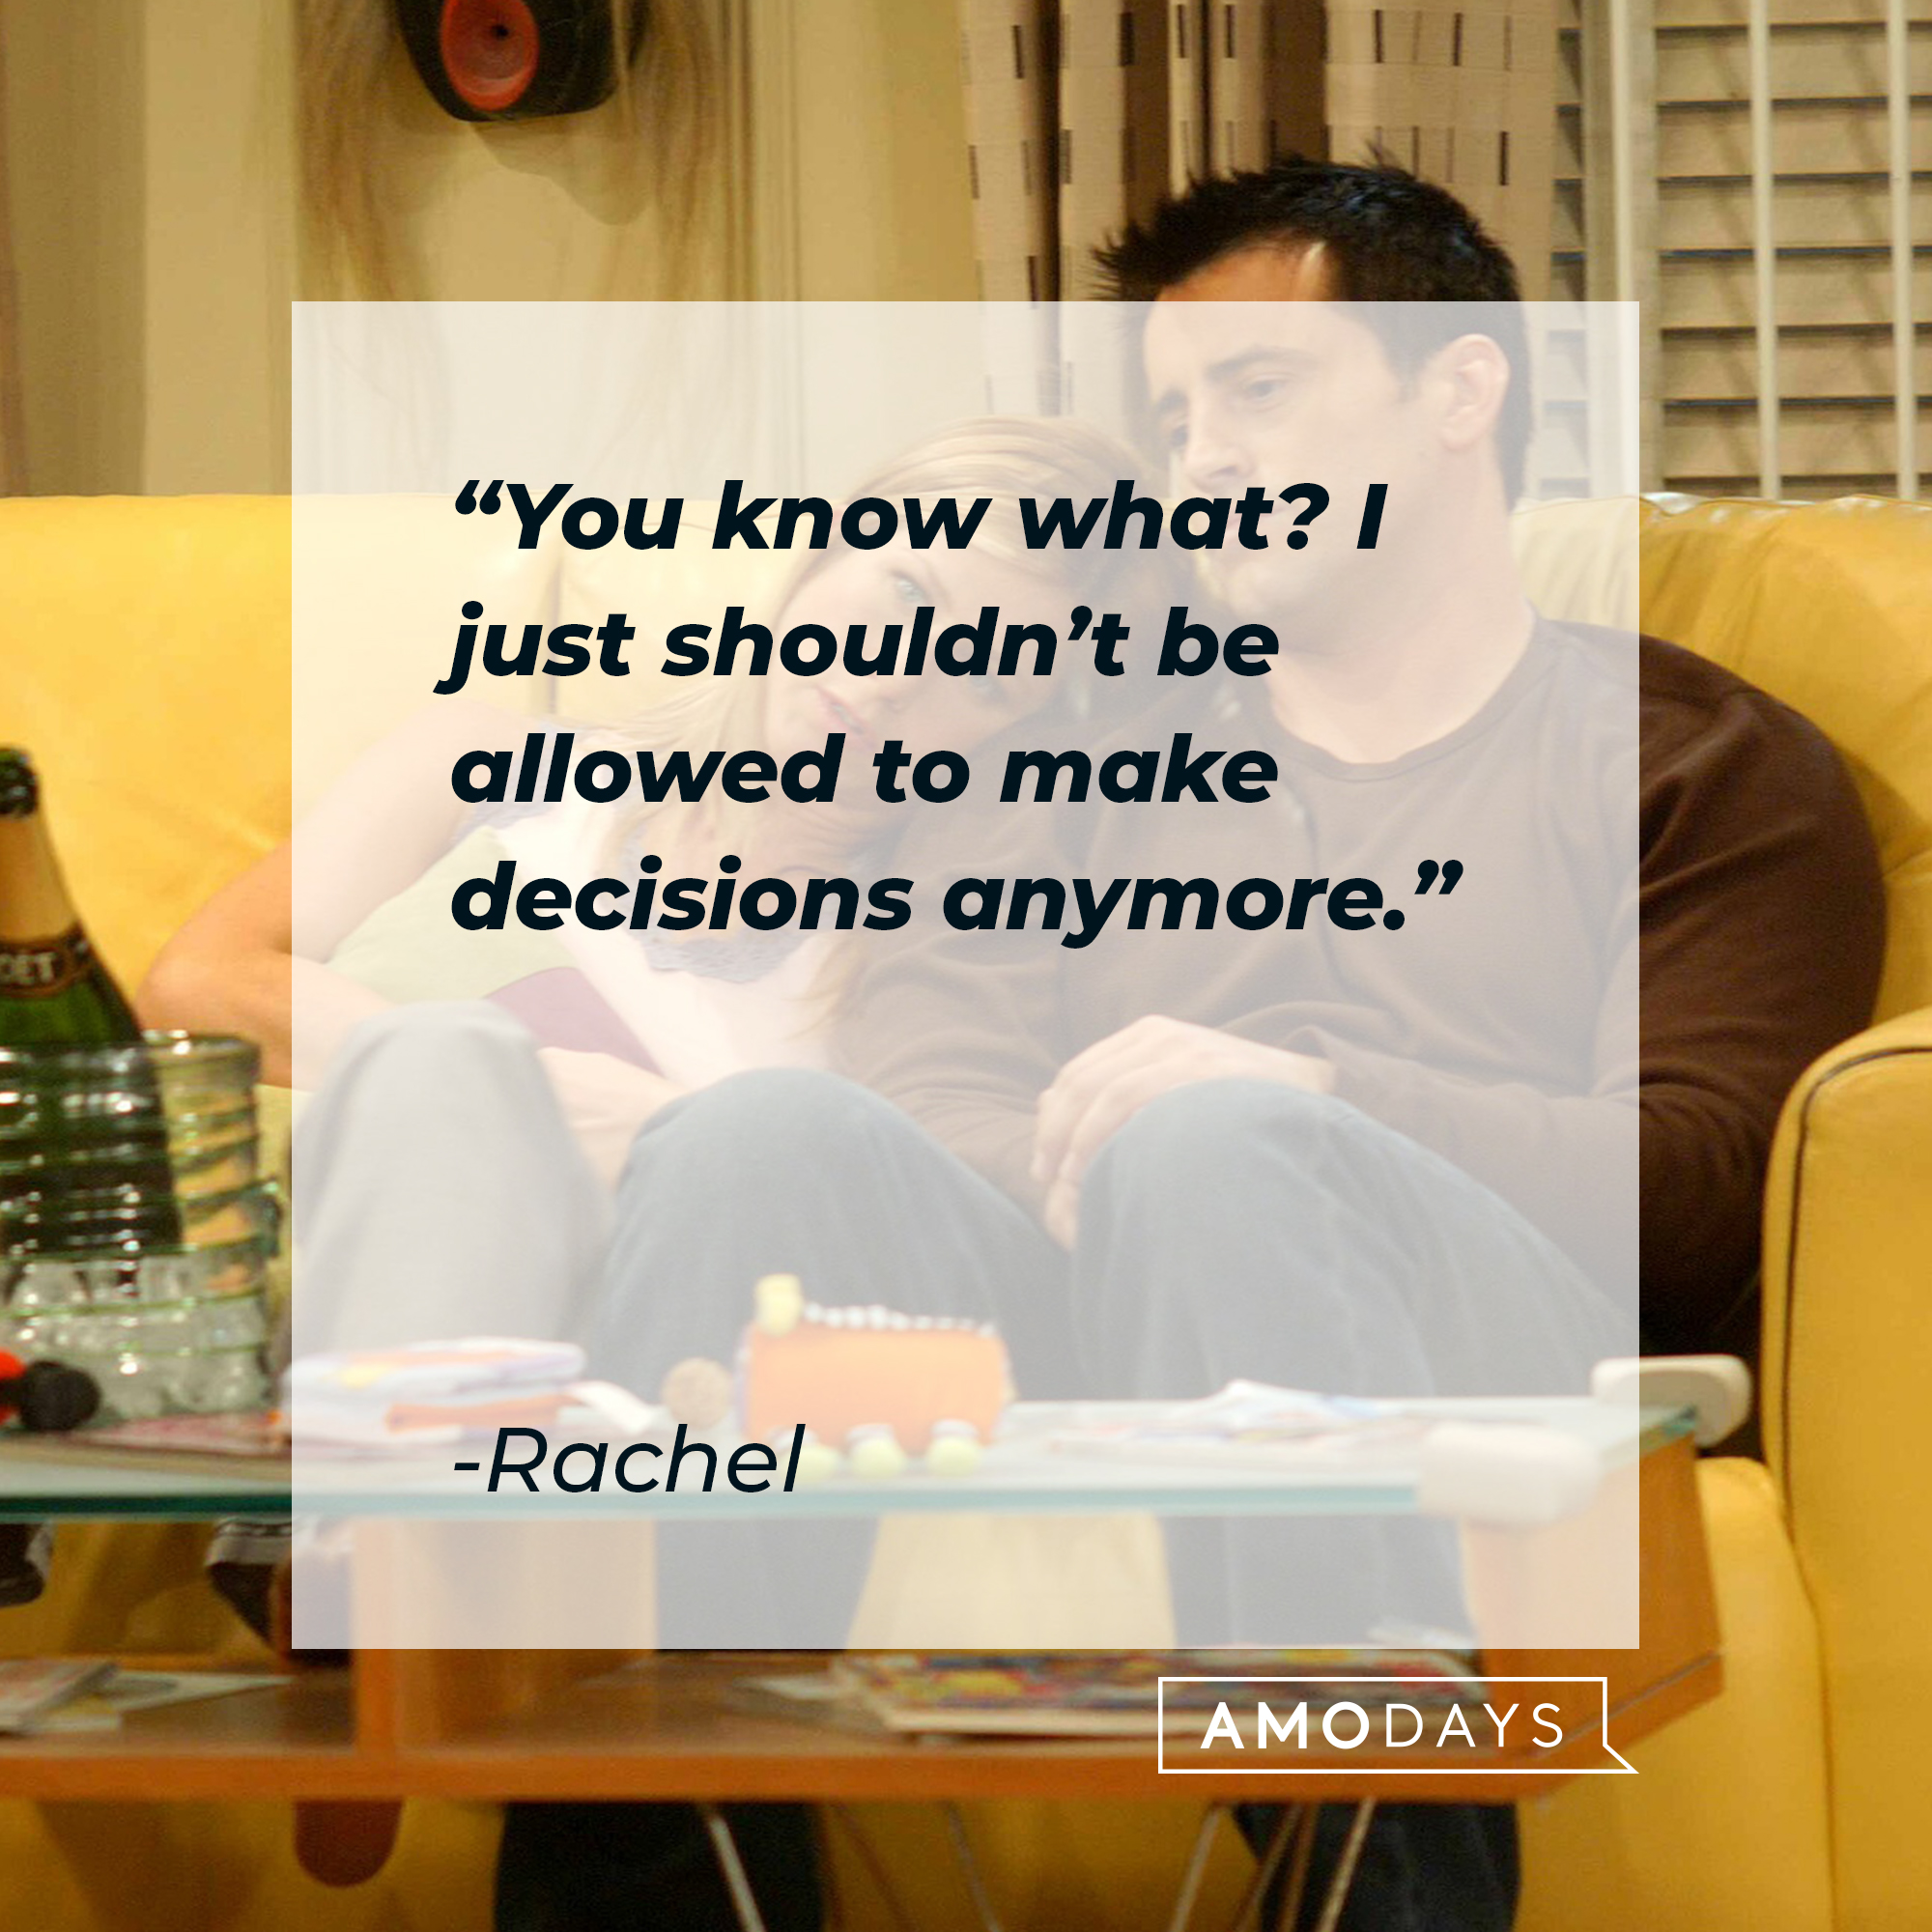 Rachel's quote: “You know what? I just shouldn’t be allowed to make decisions anymore.” | Source: facebook.com/friends.tv